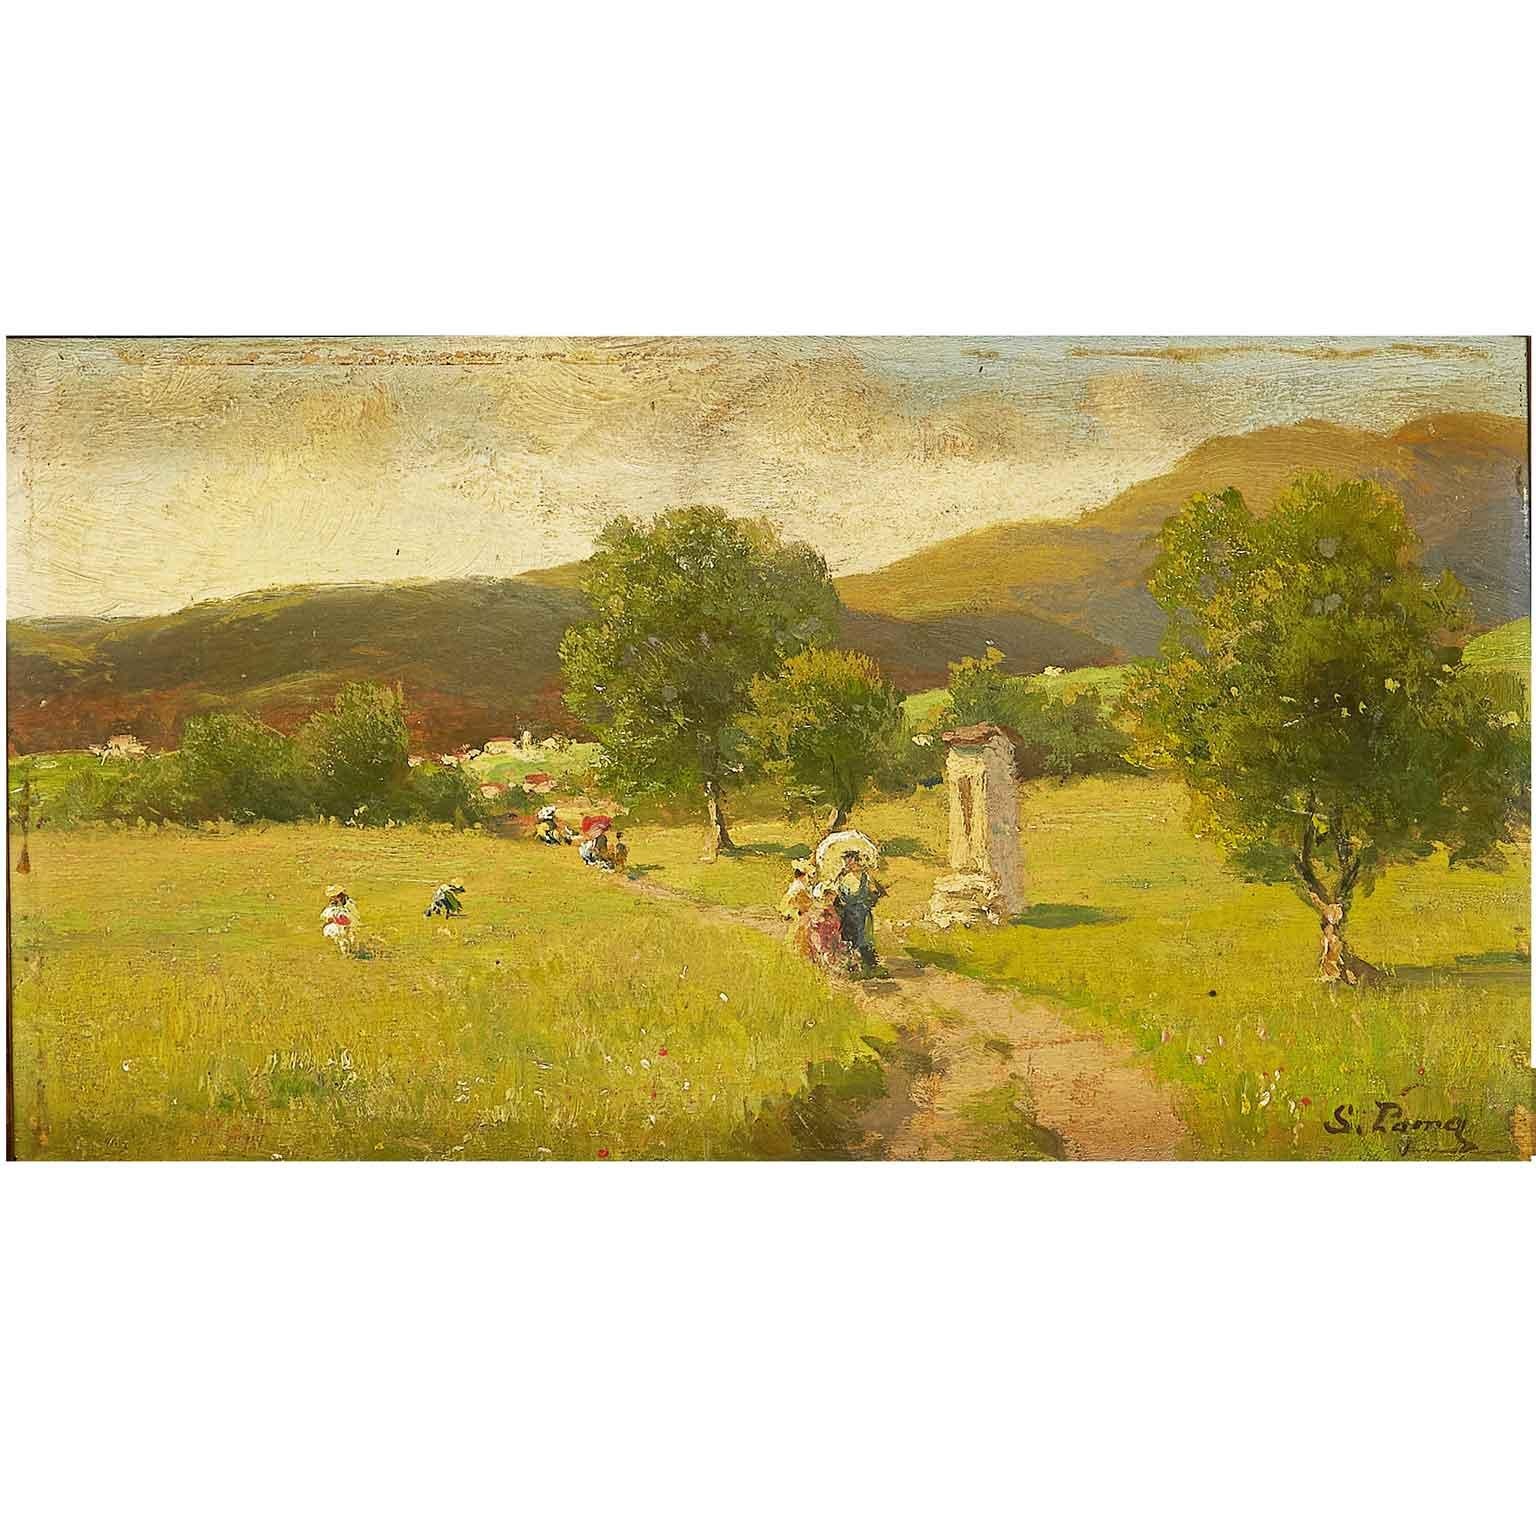 A lovely green summer landscape with figures, a late 19th century oil on poplar plywood  panel painting depicting depicting a green Italian Alps mountain scenery in Summer. An animated pathway of  figures in a wooded foothill countryside.